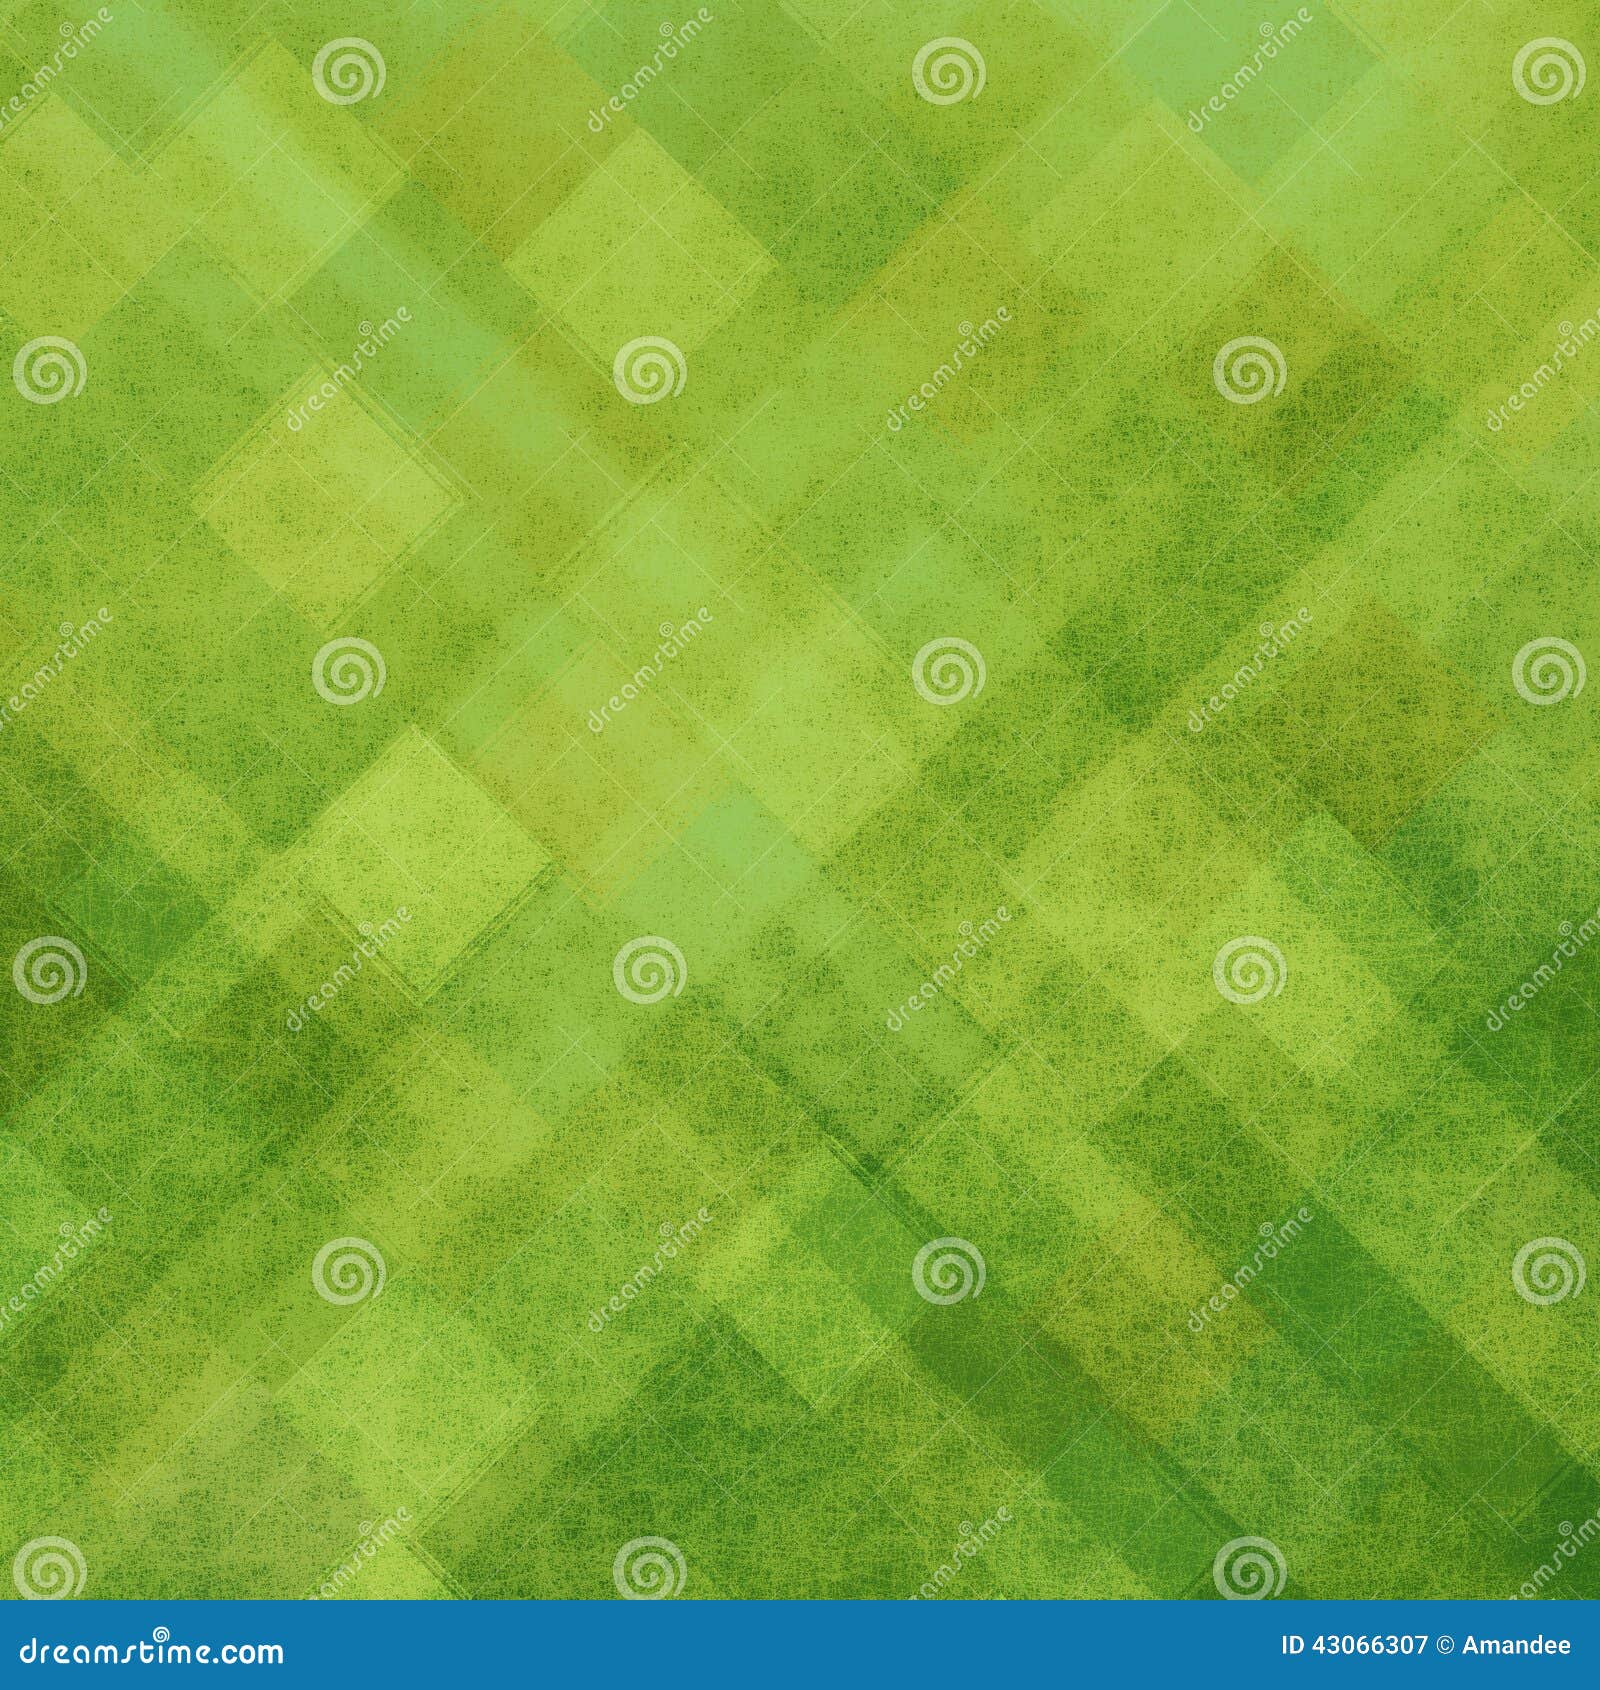 abstract bright green background  and texture